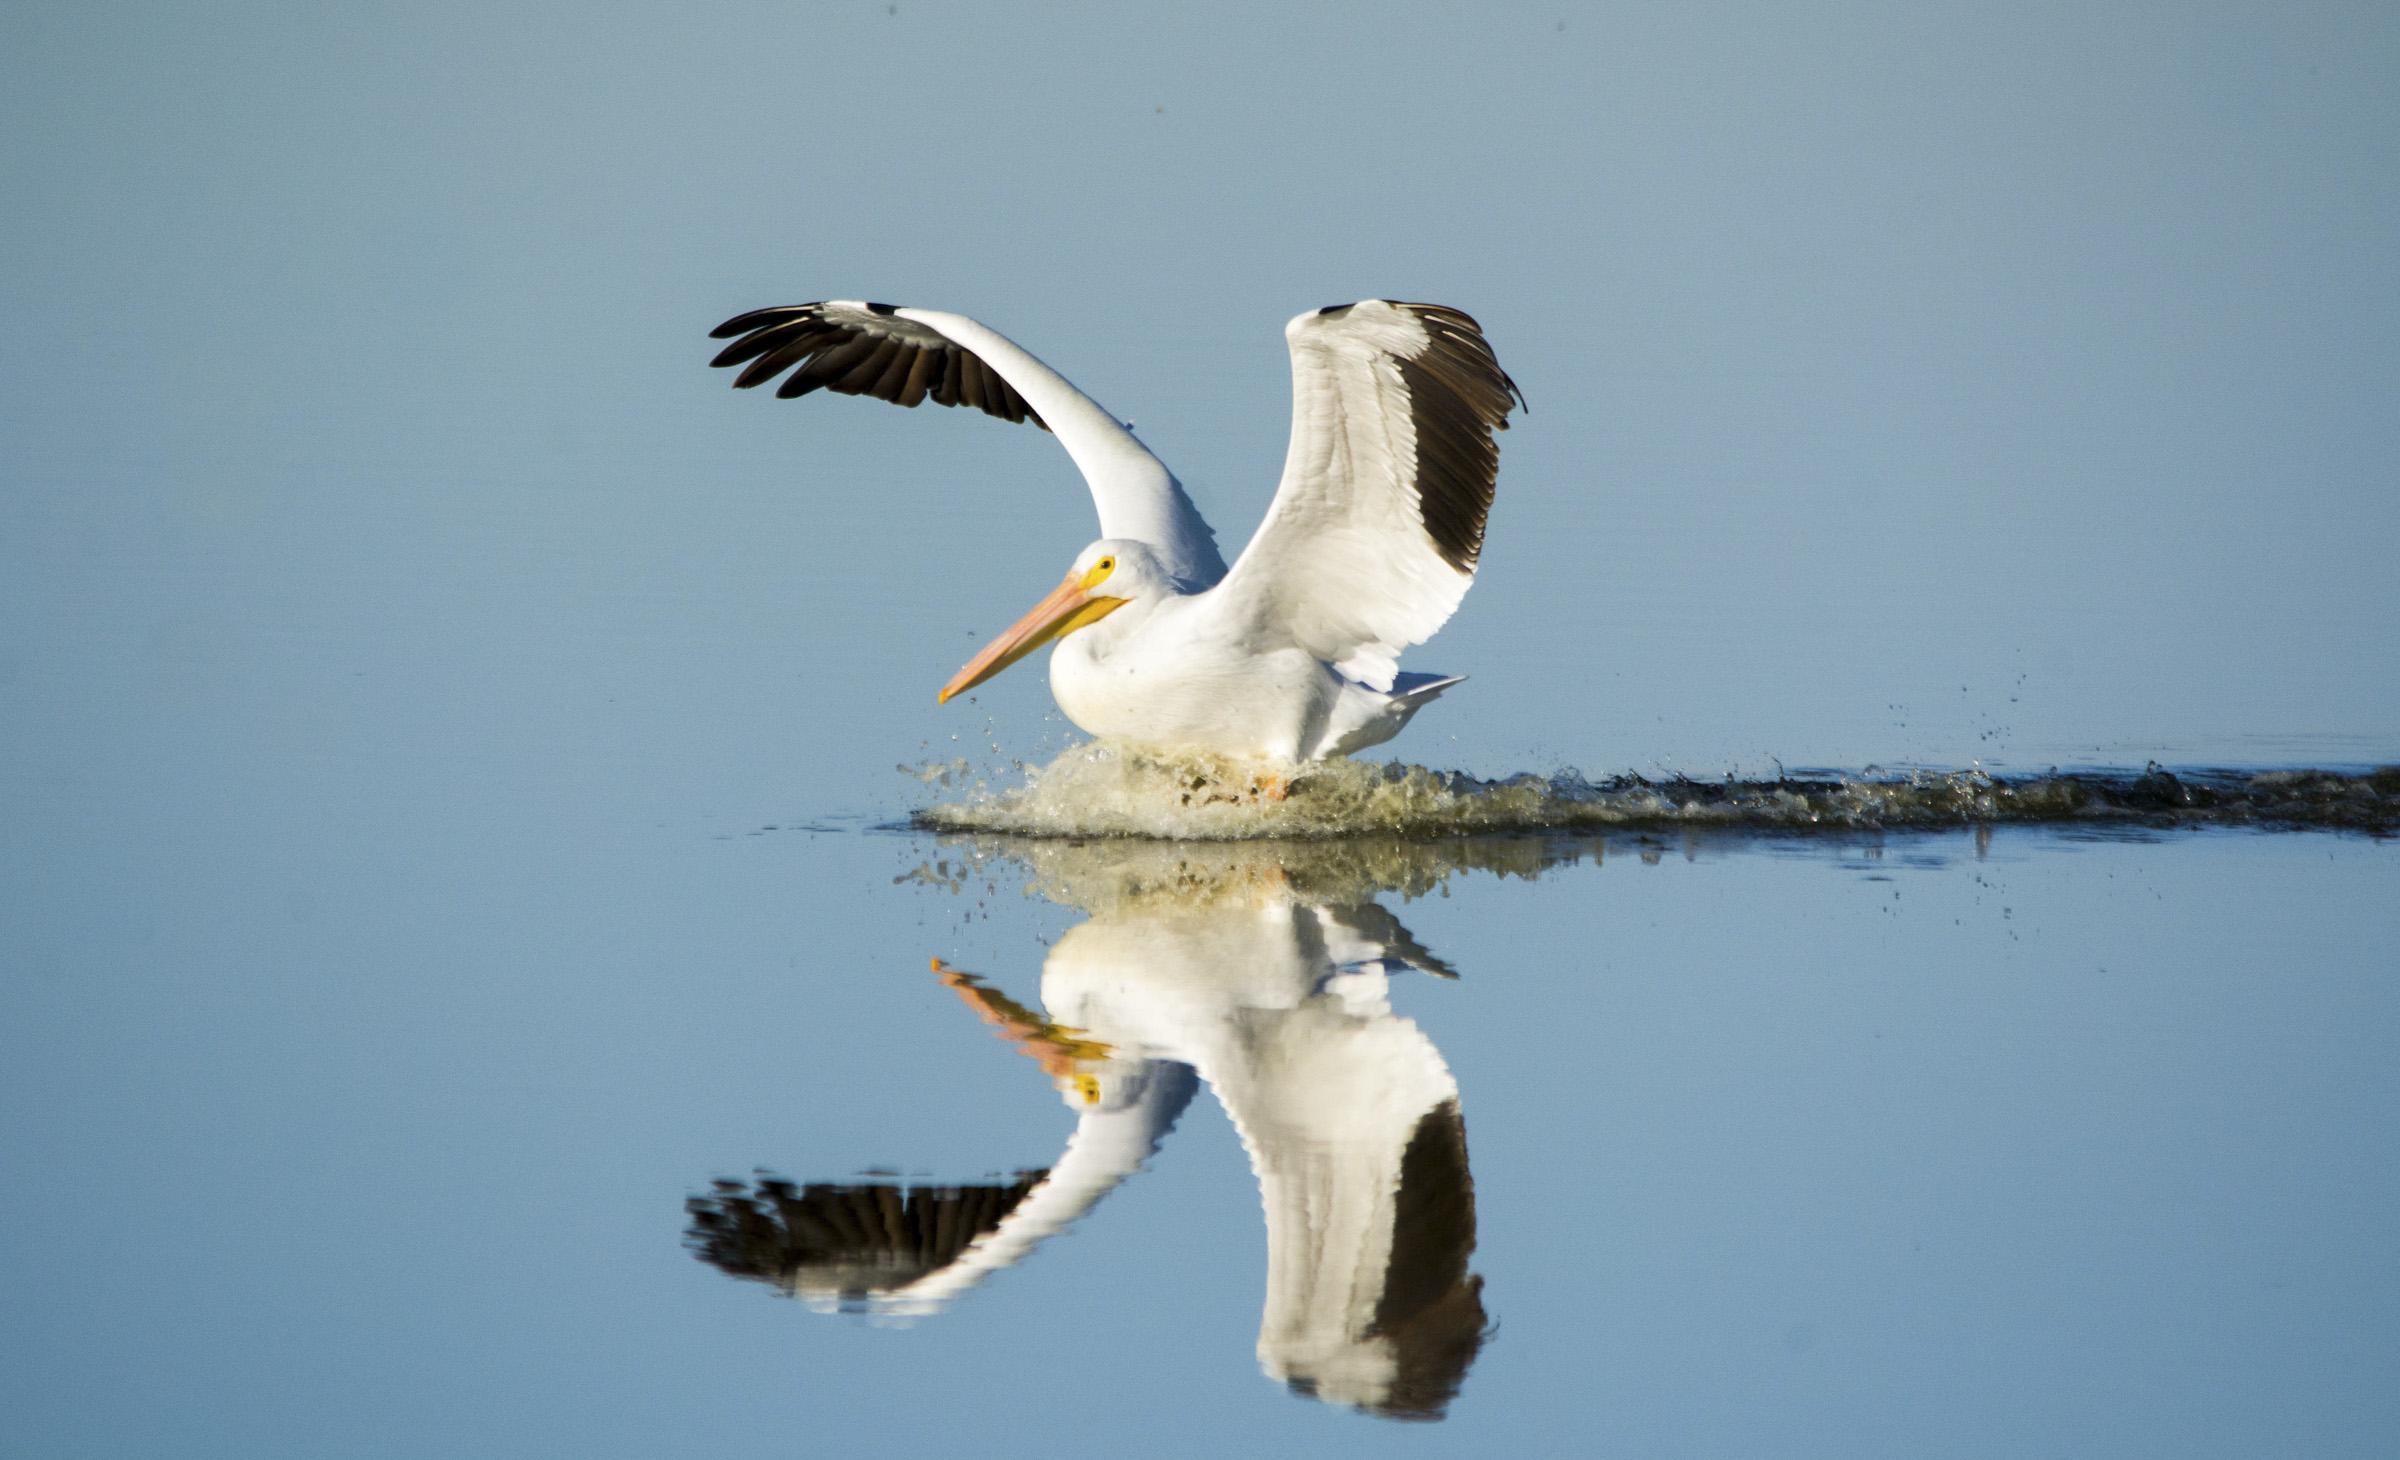 An American White Pelican lands on a water surface.